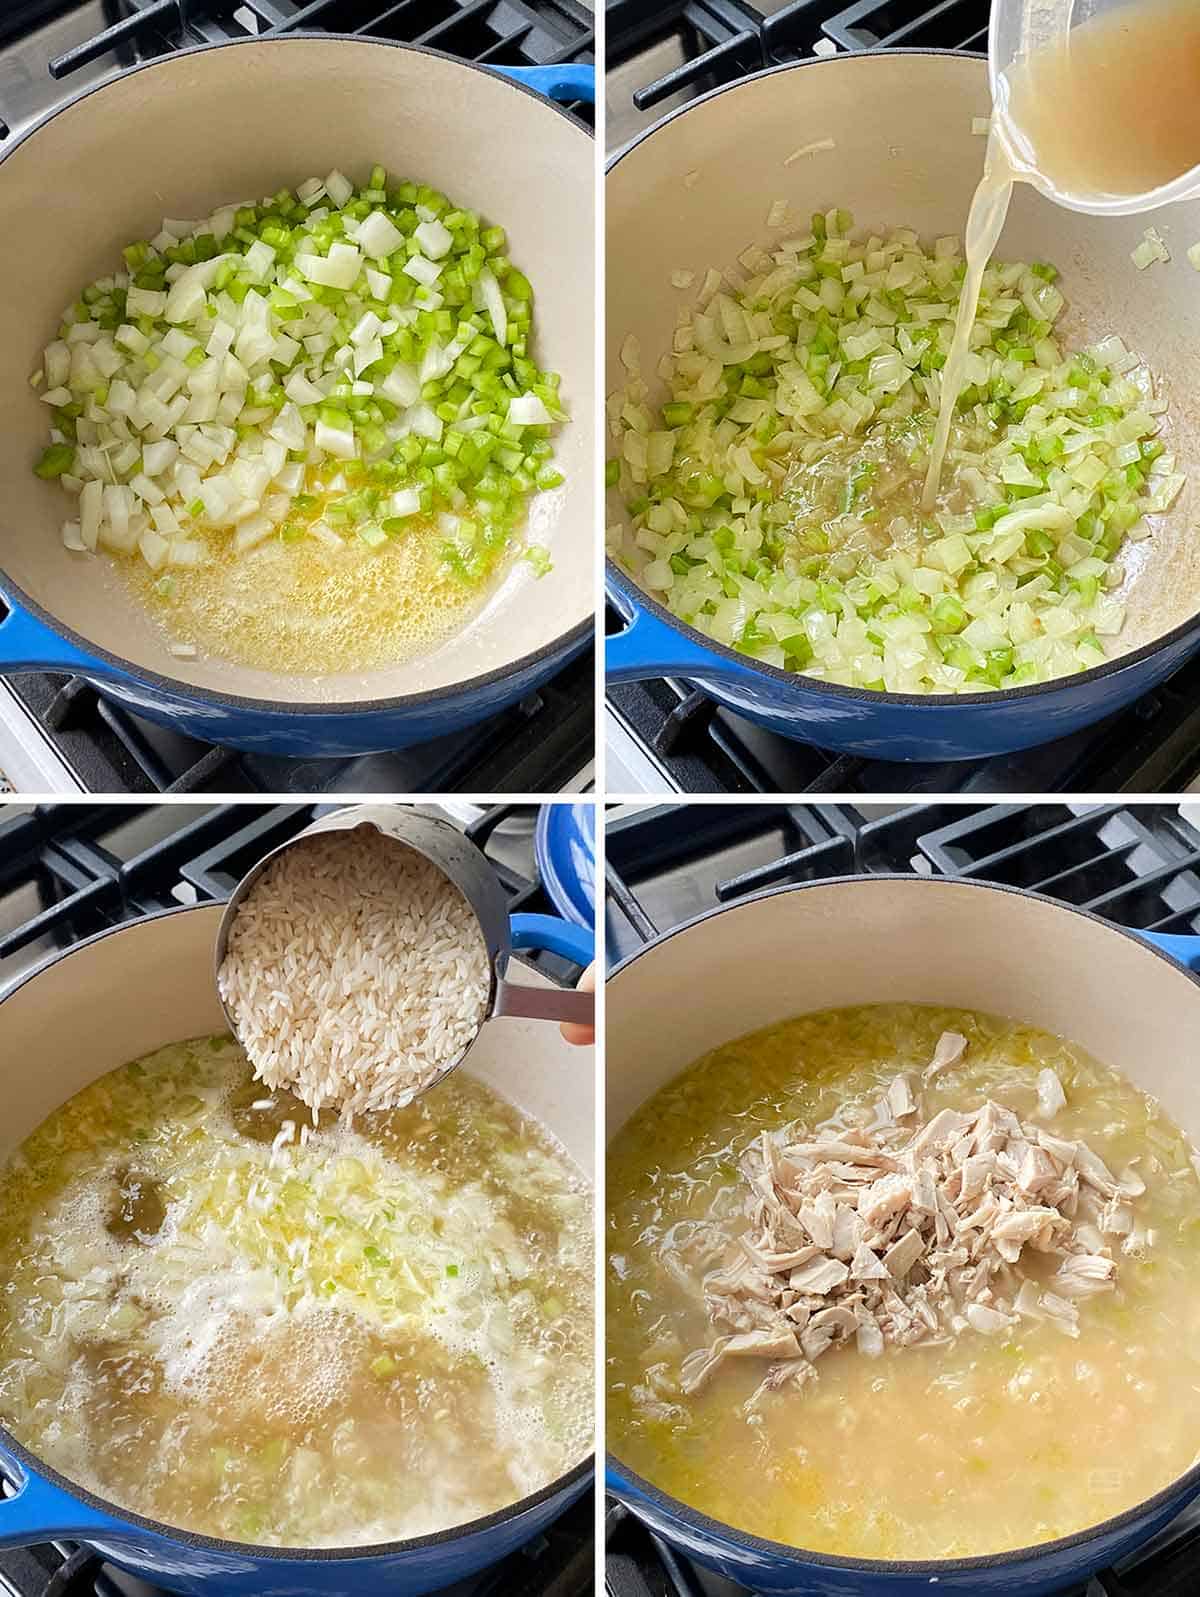 Process collage showing sautéing celery and onions in butter, adding broth, rice, and chicken in a Dutch oven.